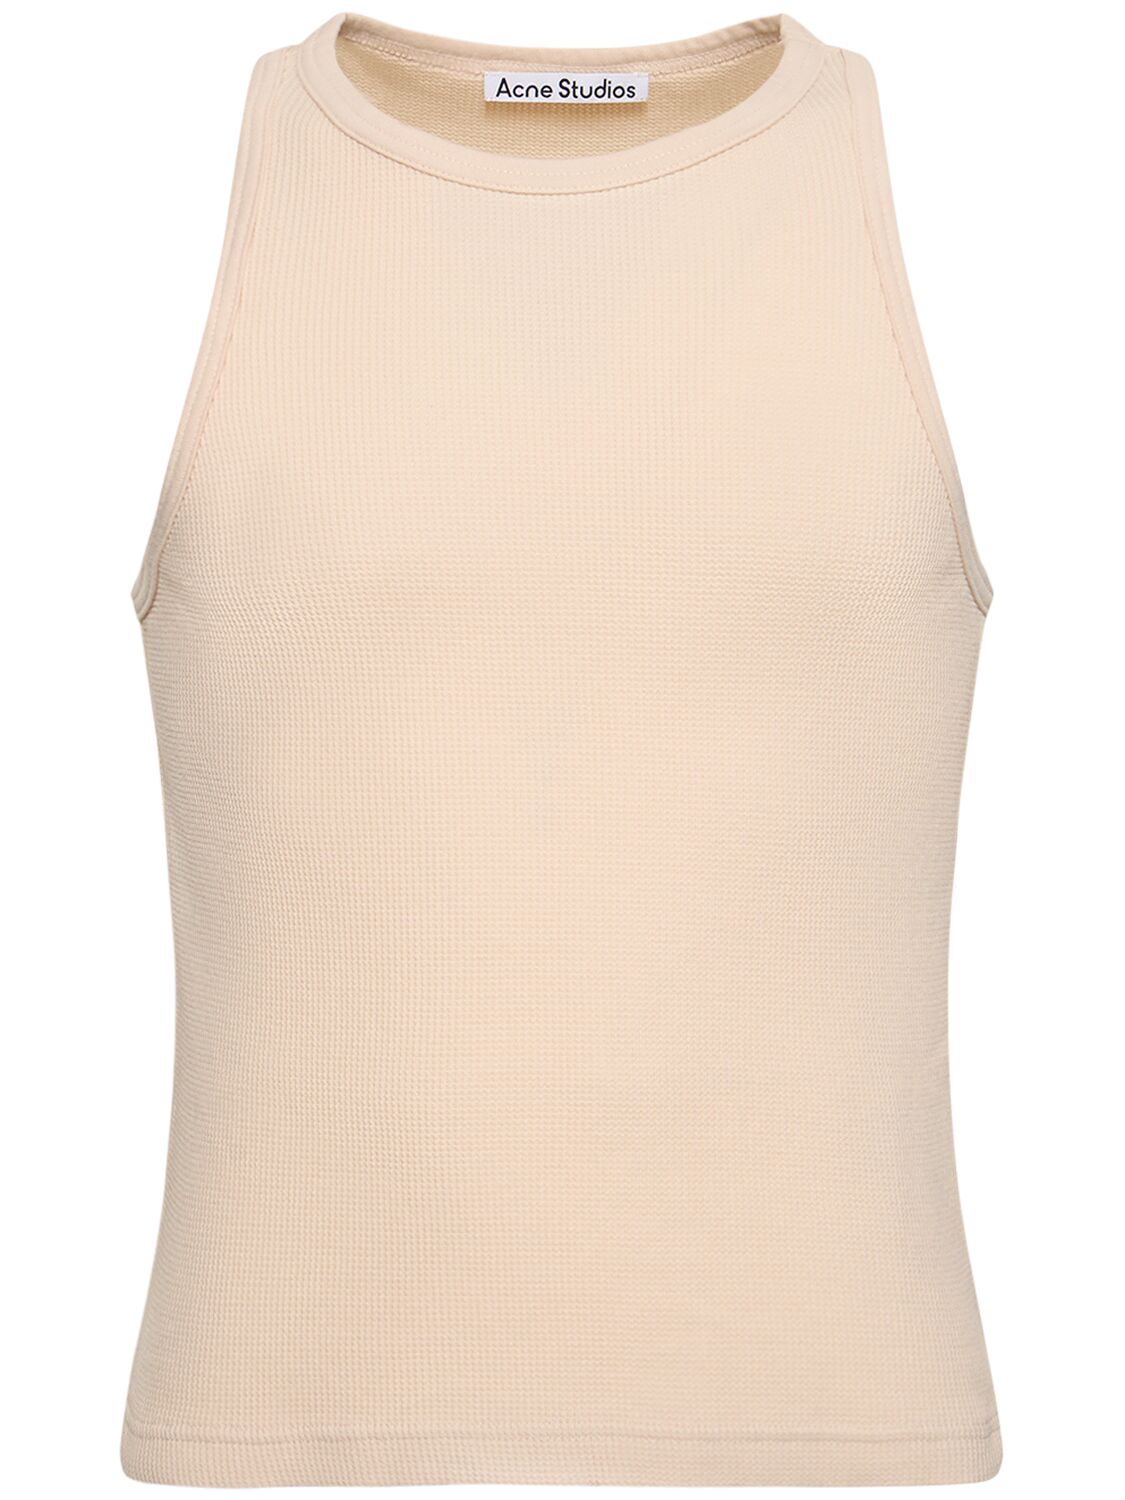 Image of Cotton Jersey Tank Top